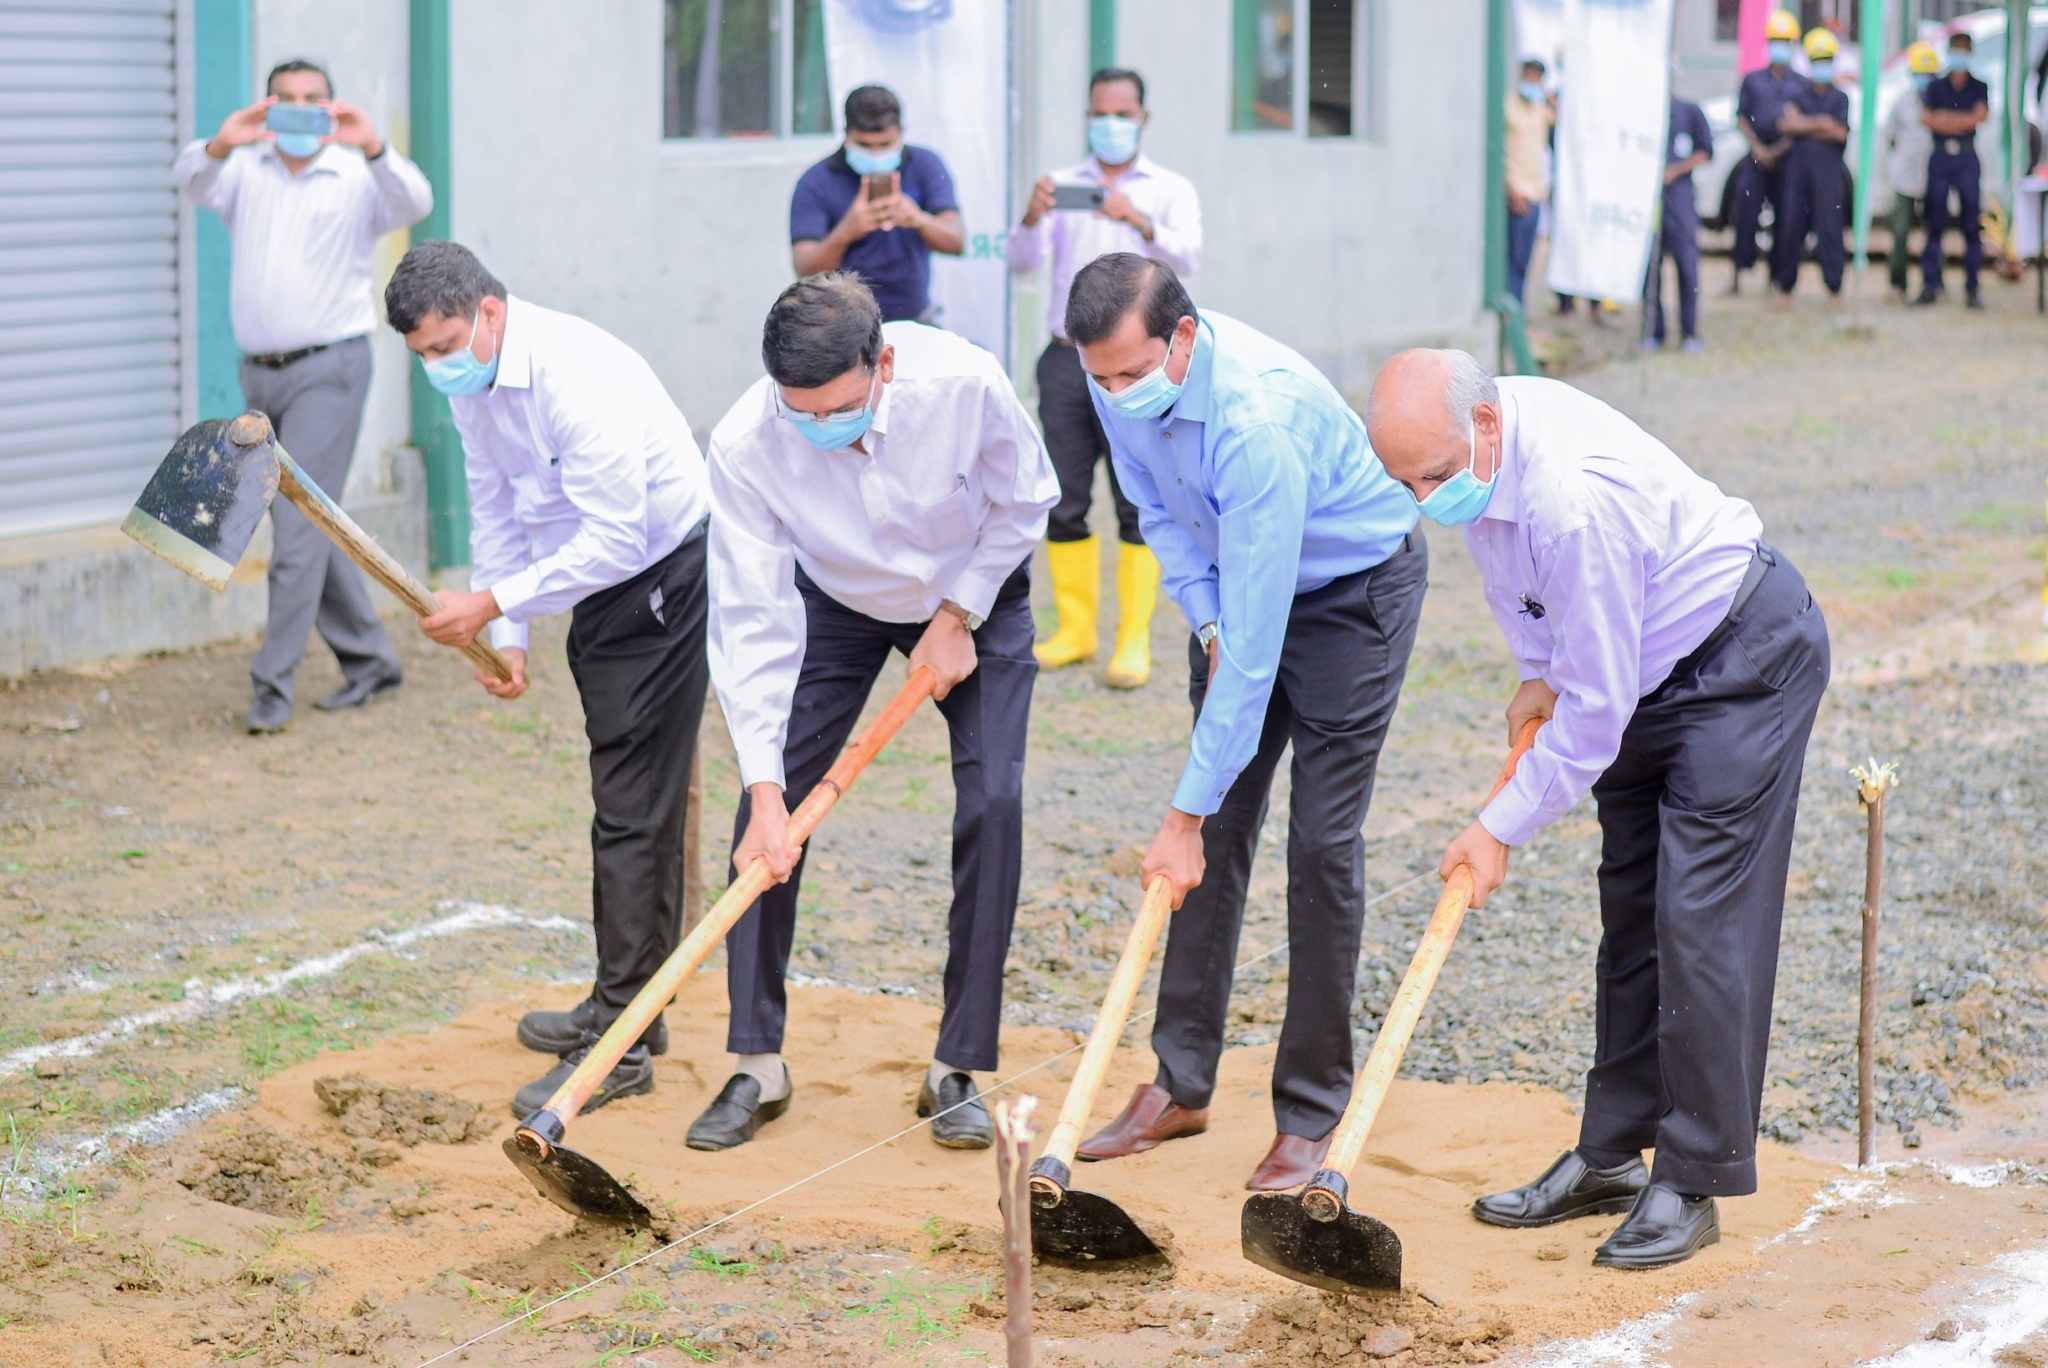 GRI breaks ground on phase 2 of $100 million speciality tyre plant